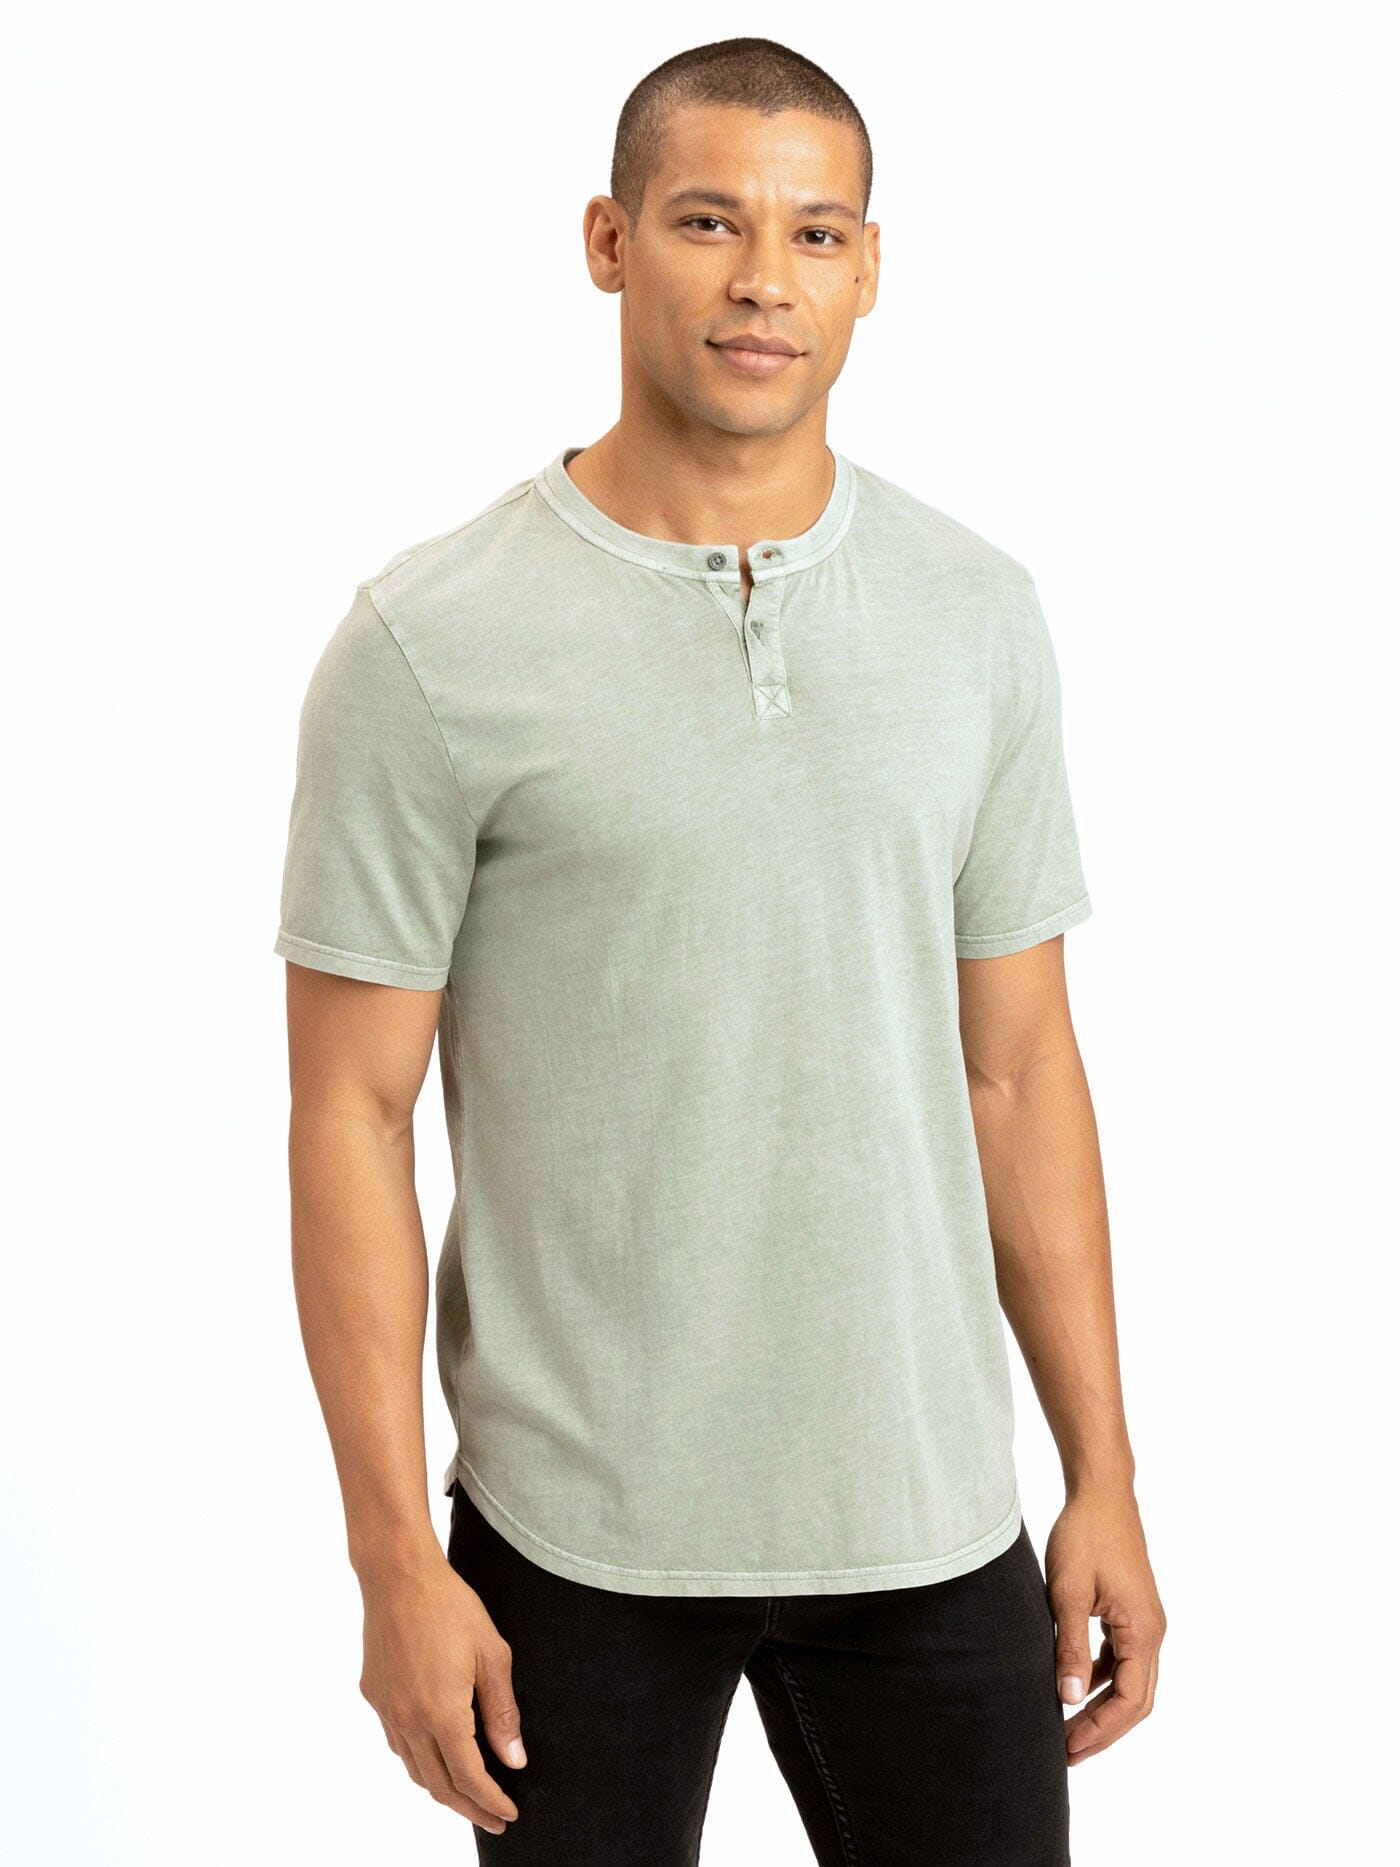 Draco Mineral Wash Short Sleeve Henley Mens Tops Tshirt Short Threads 4 Thought 